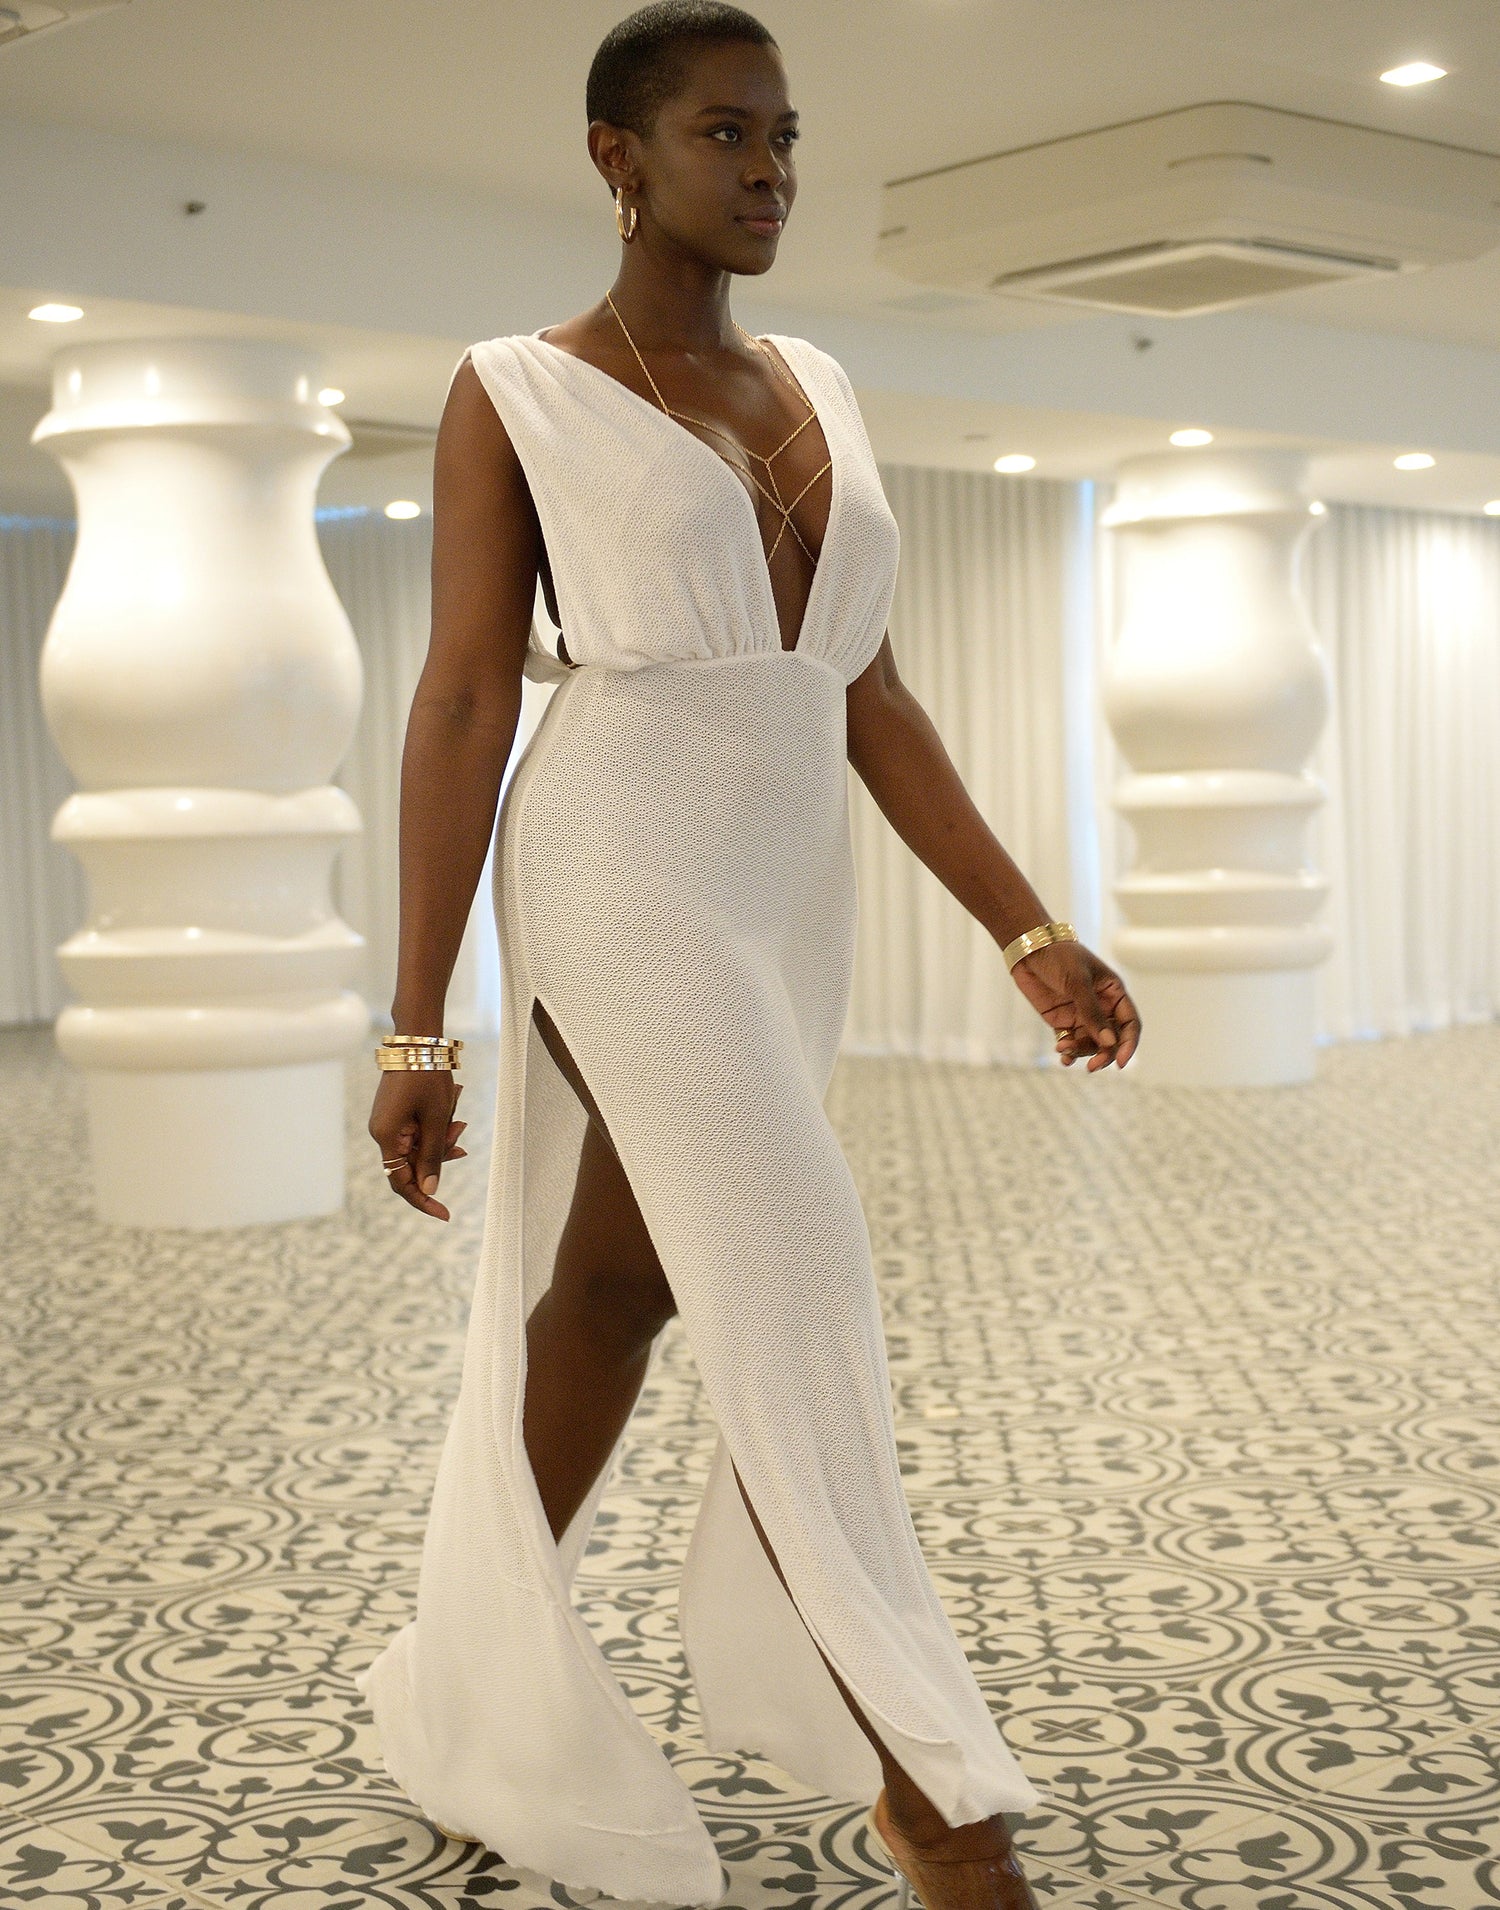 Annika Beach Cover Up Maxi Dress in White - Angled View / Summer 2021 Miami Runway Show